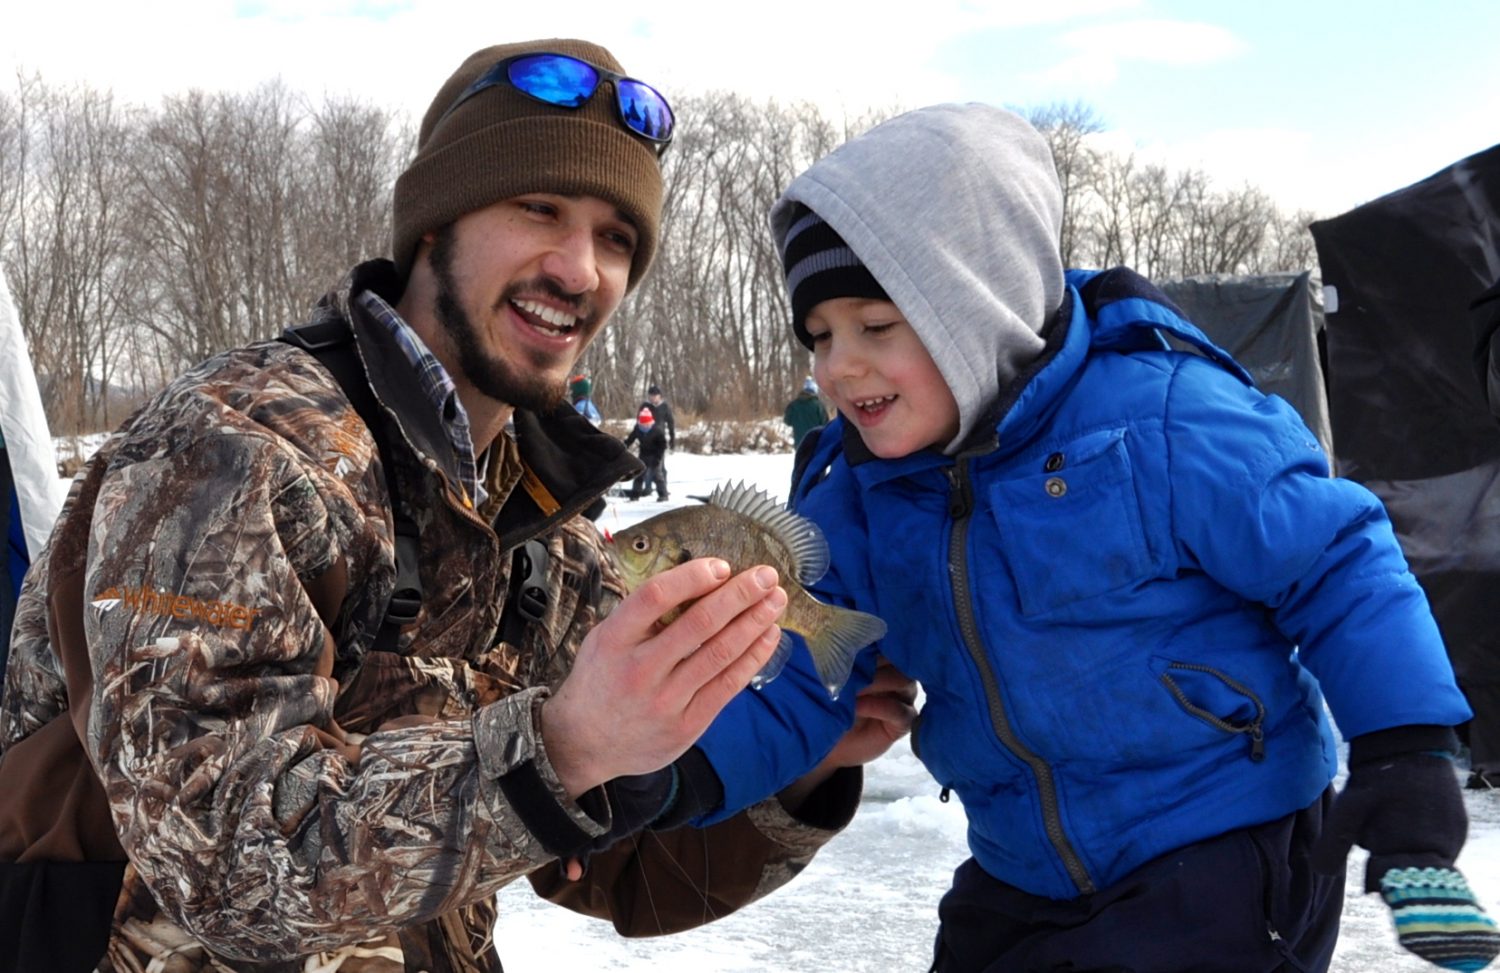 A volunteer gives a child a closer look at a fish caught during the ice fishing event.
Bartholome Rondet/Winonan